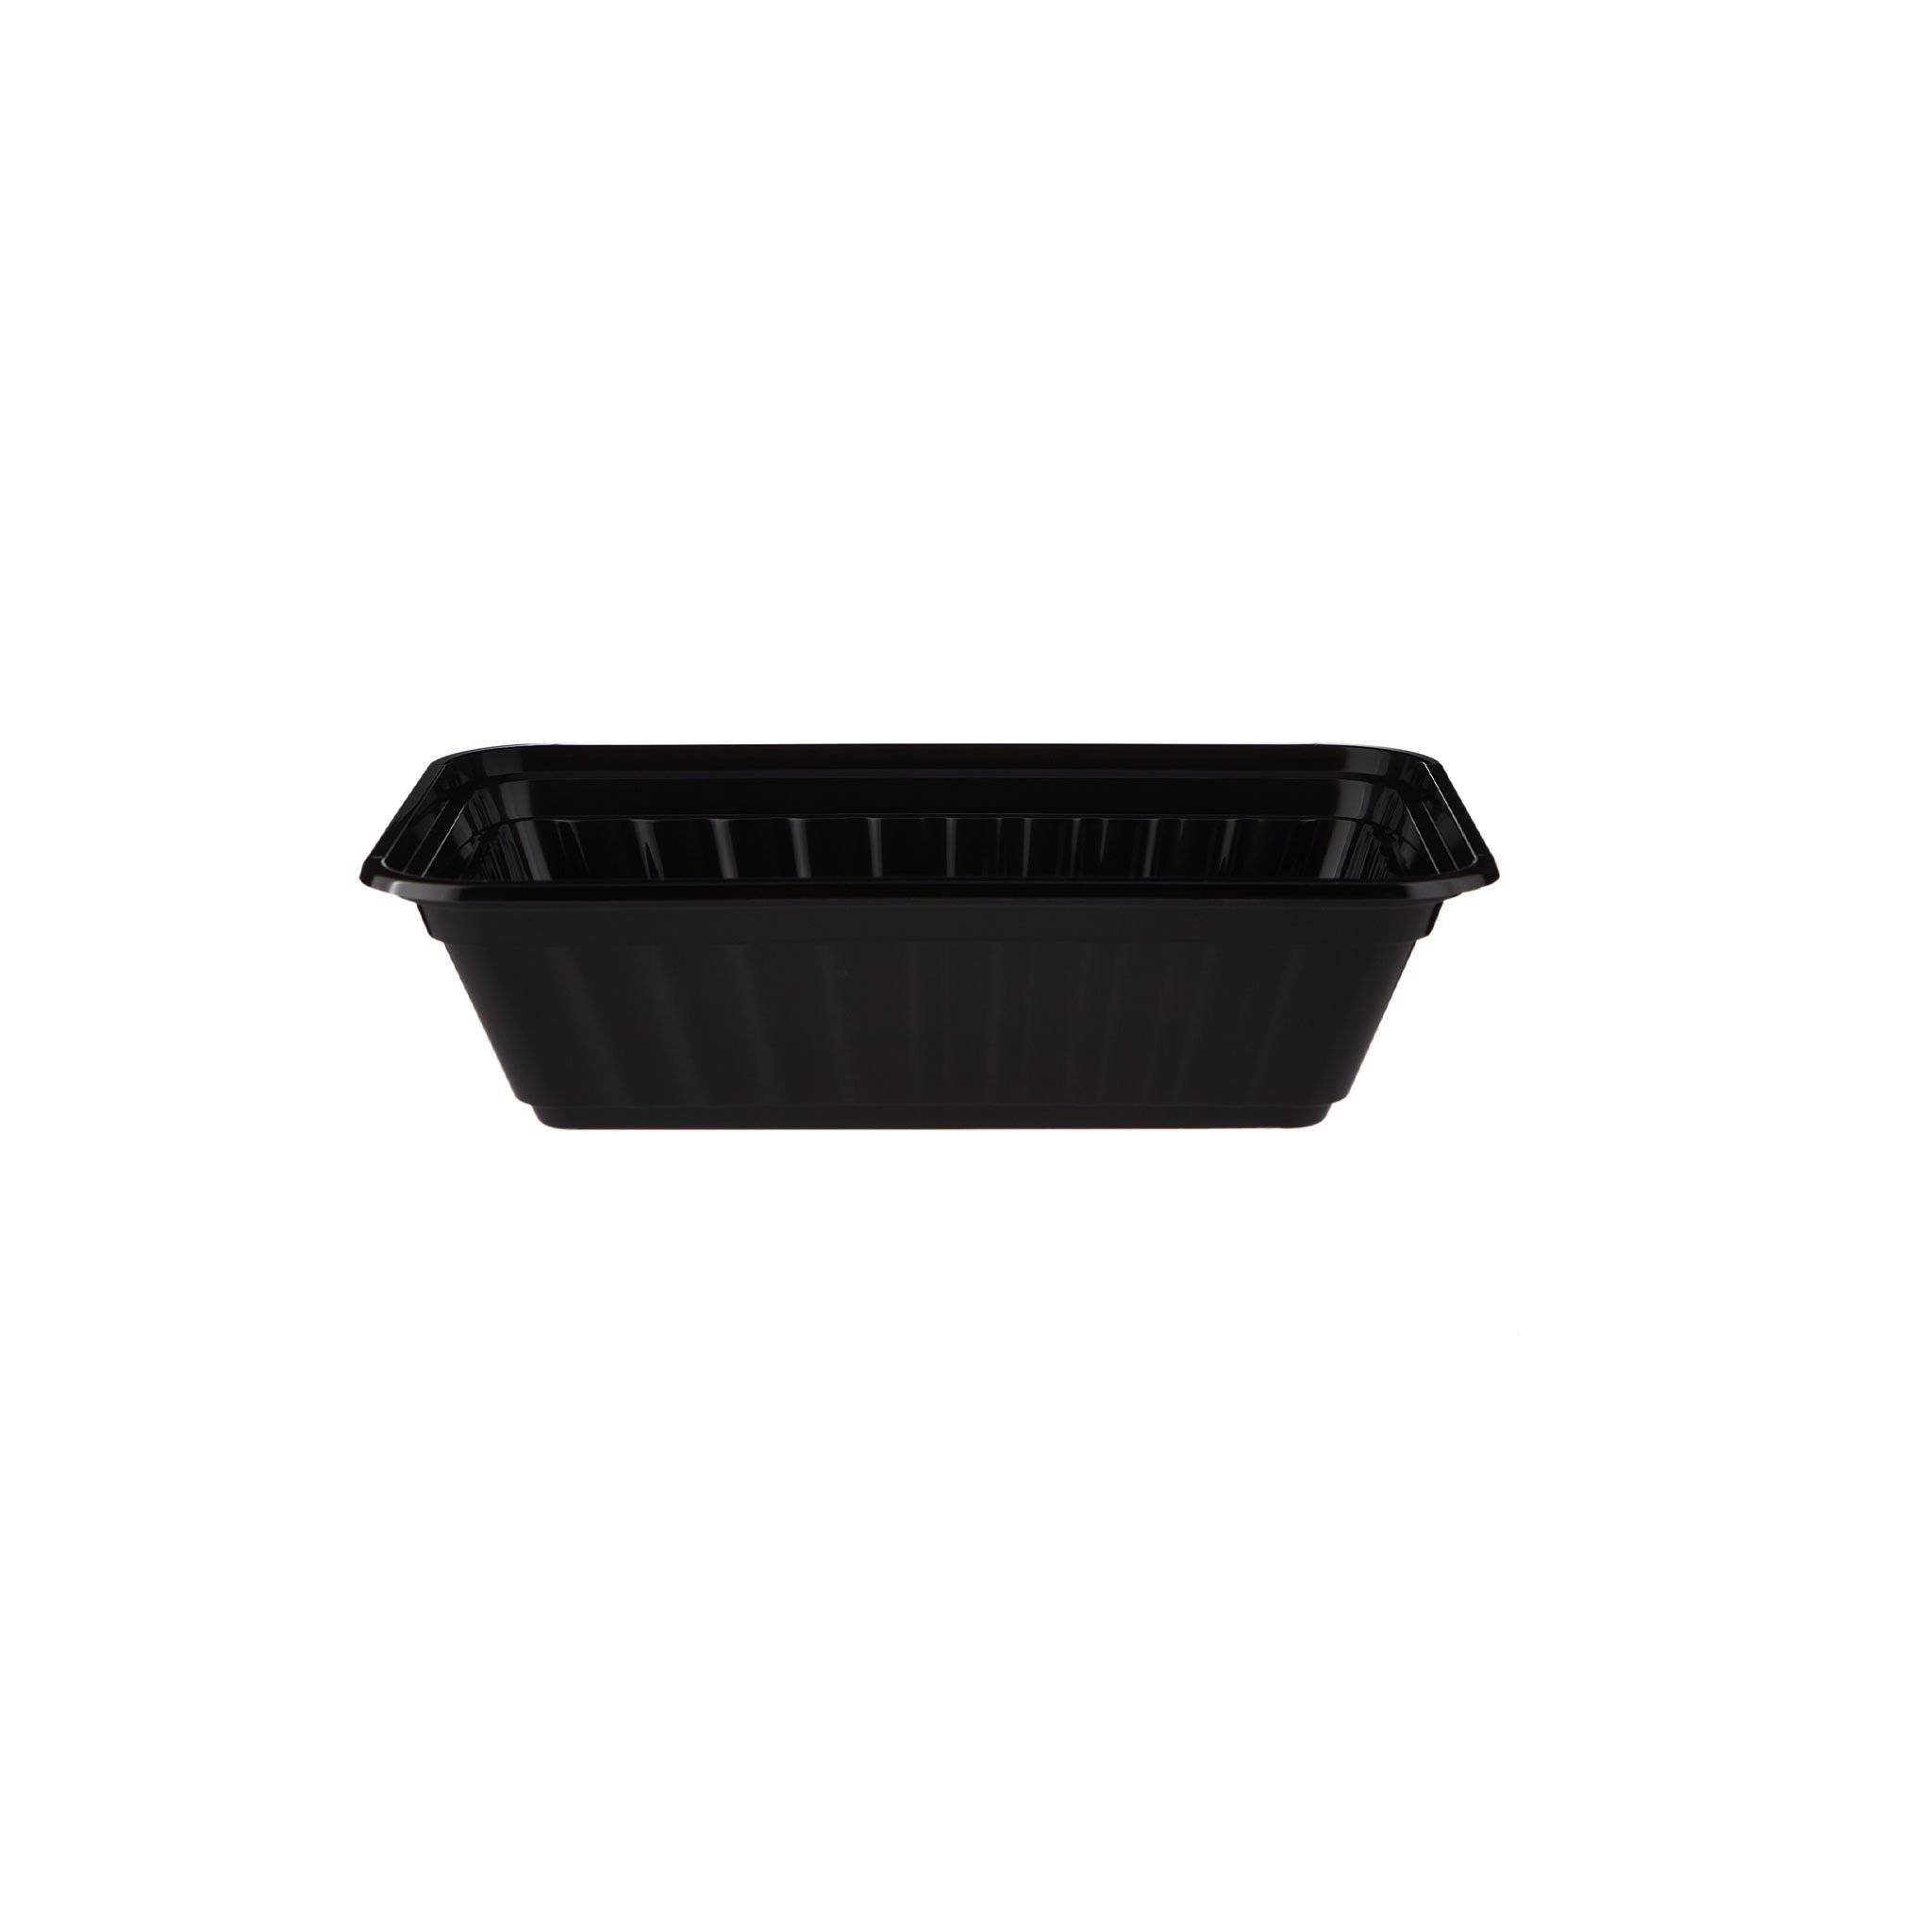 Black Base Rectangular Container 24 Oz 300 Pieces - Hotpack Global